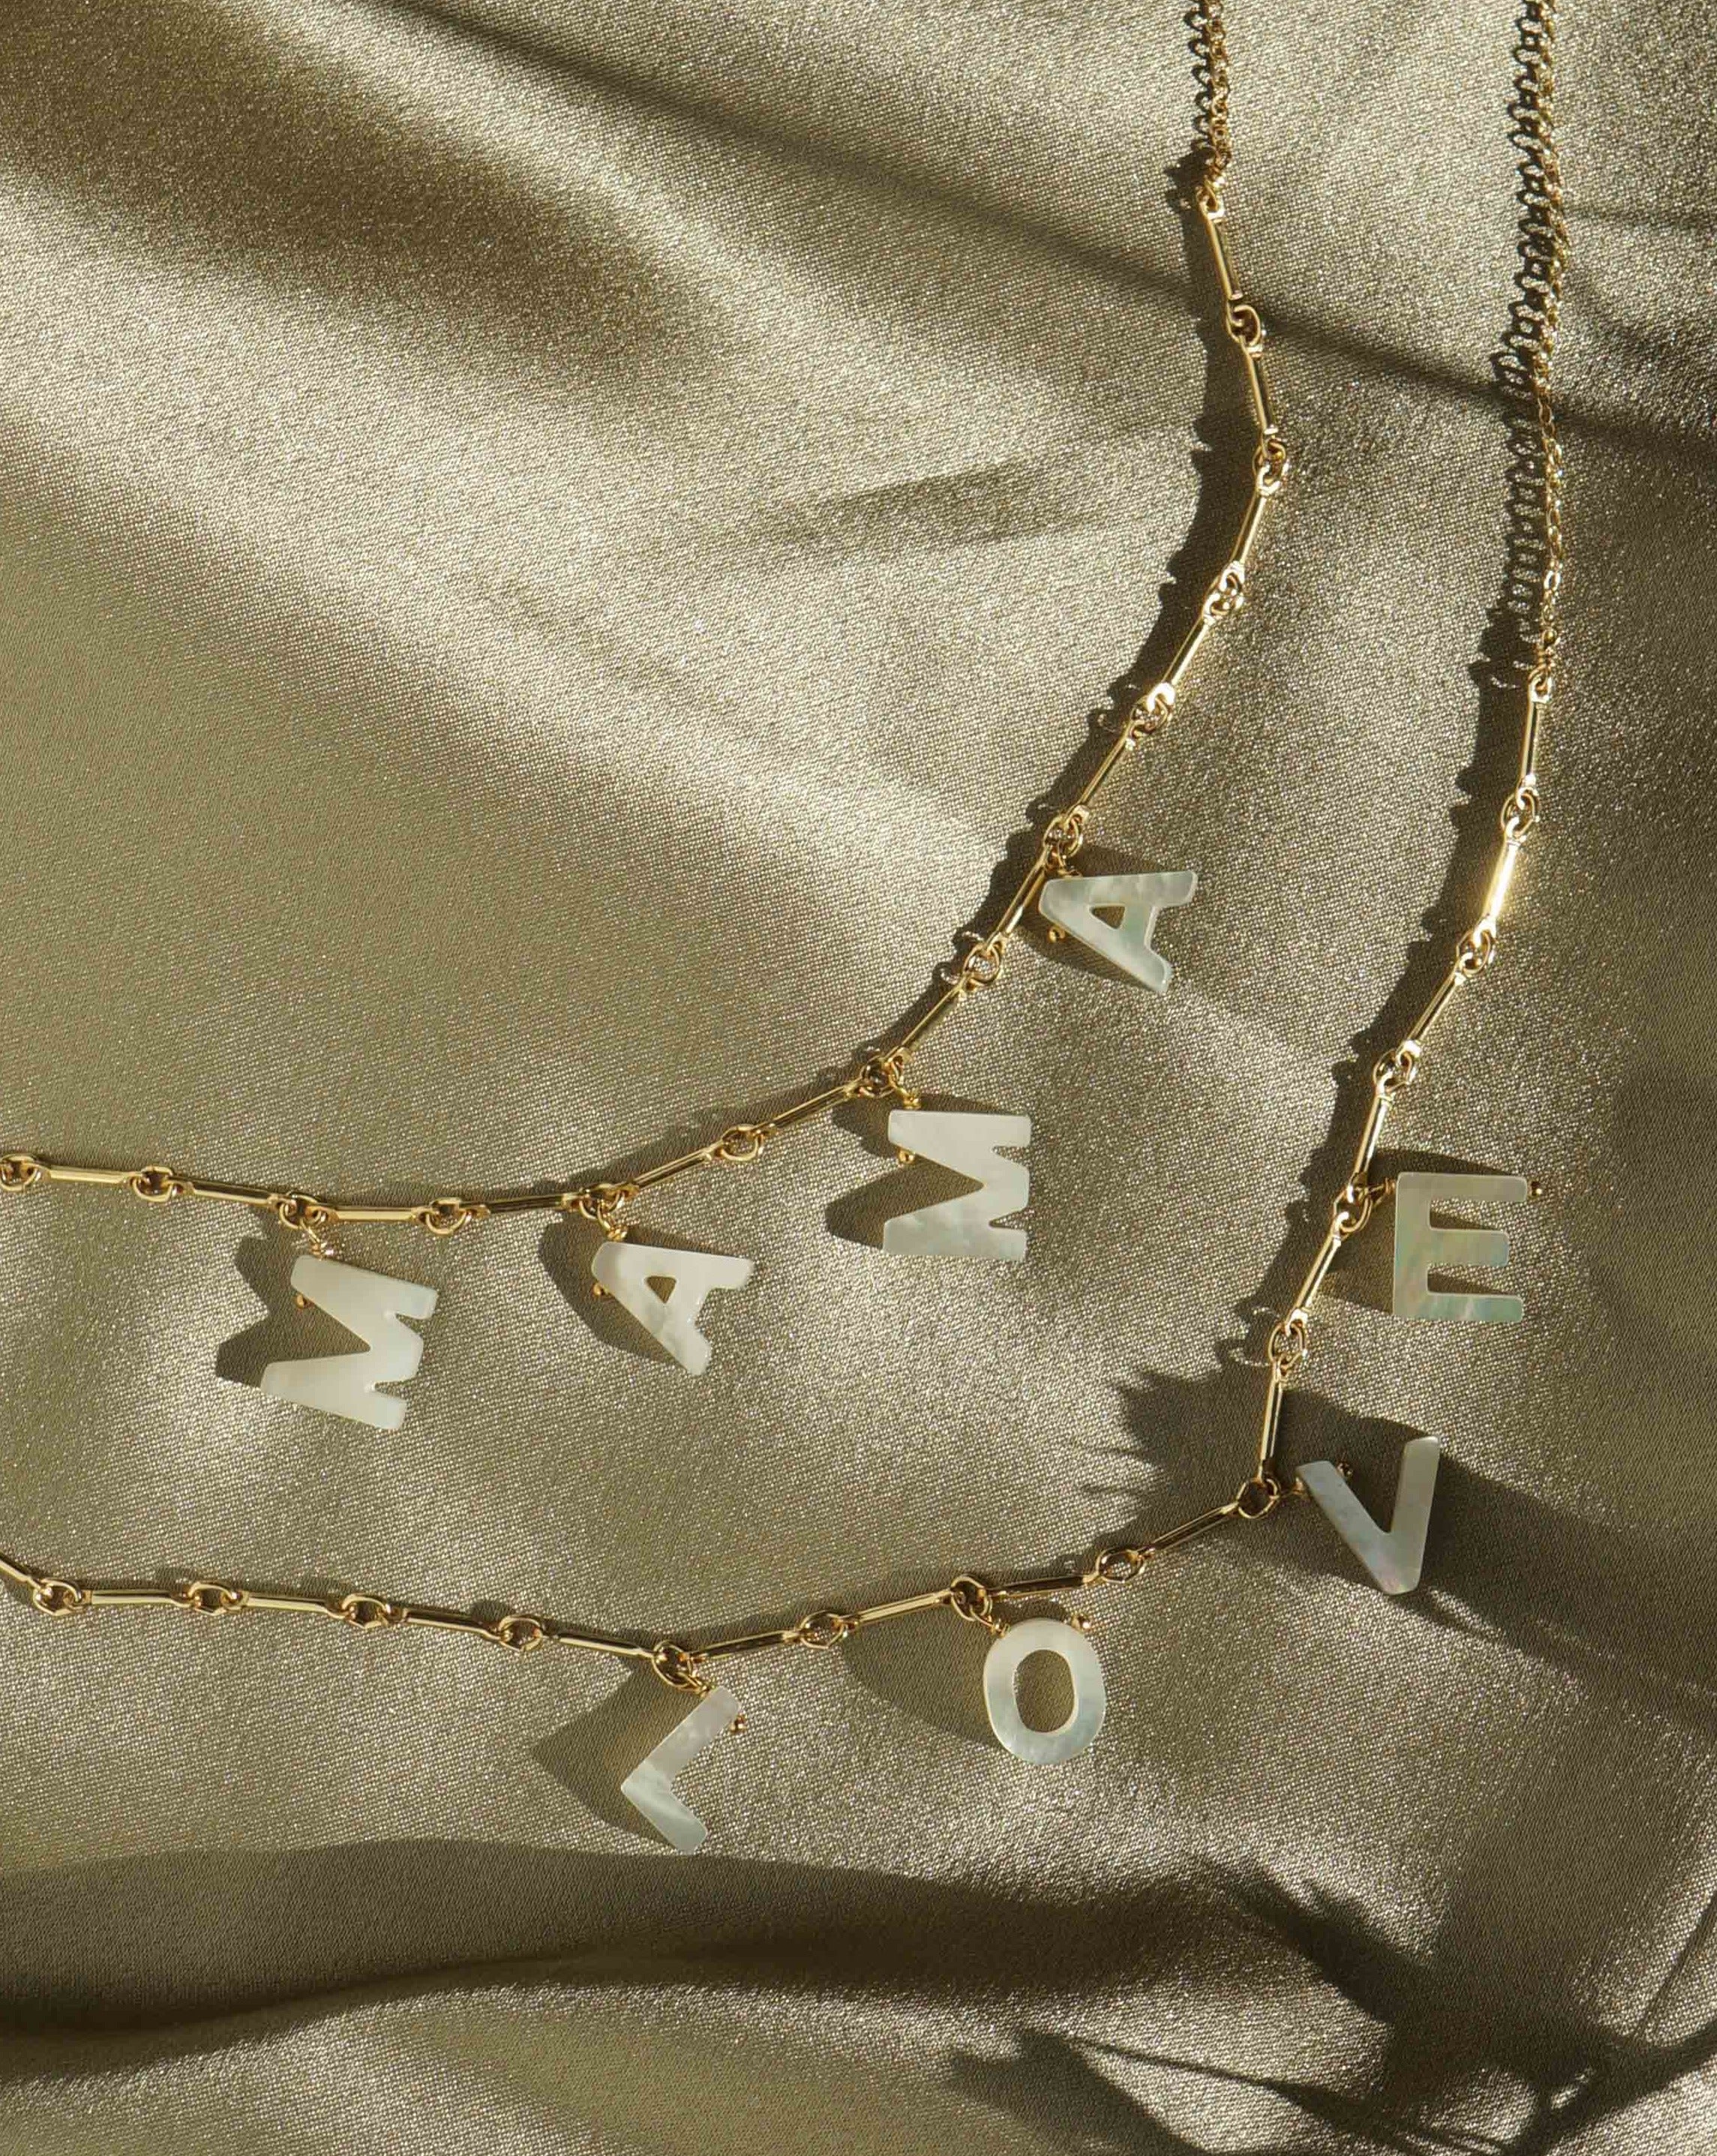 BFF Necklace by KOZAKH. A 16 to 18 inch adjustable length necklace in 14K Gold Filled, featuring hand carved Mother of Pearl letters BFF.